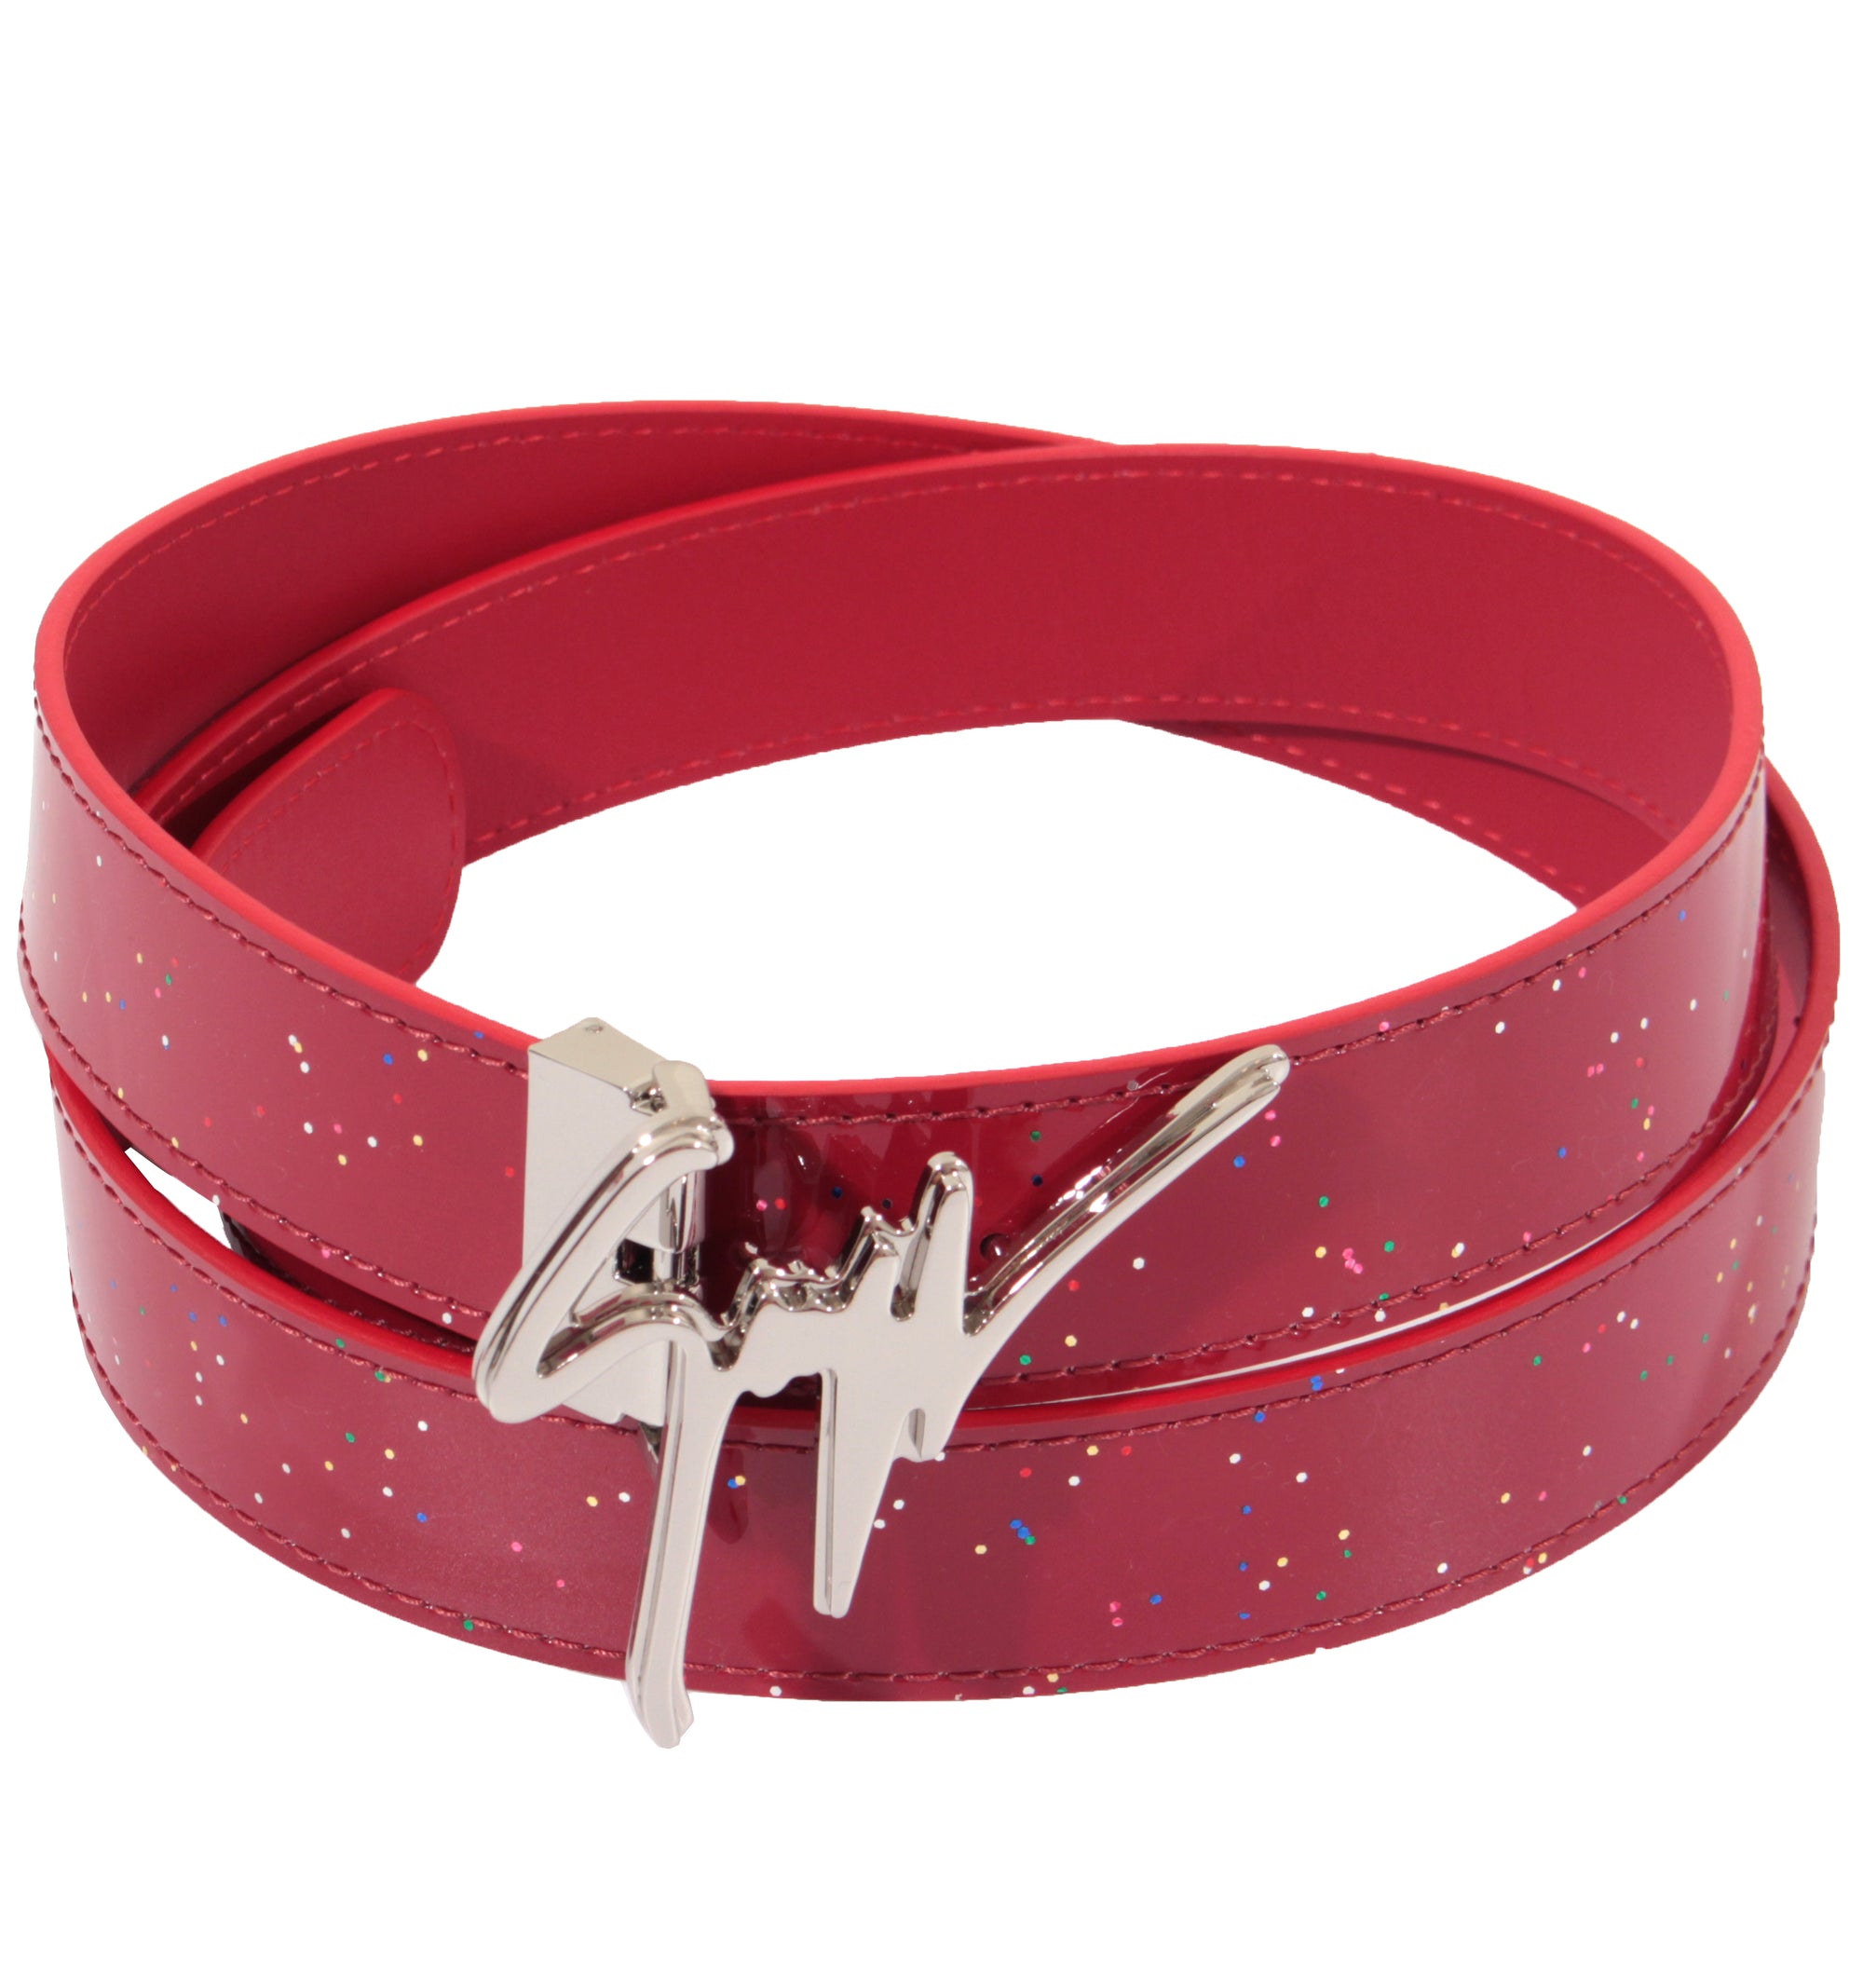 Patent Leather Belt - Red